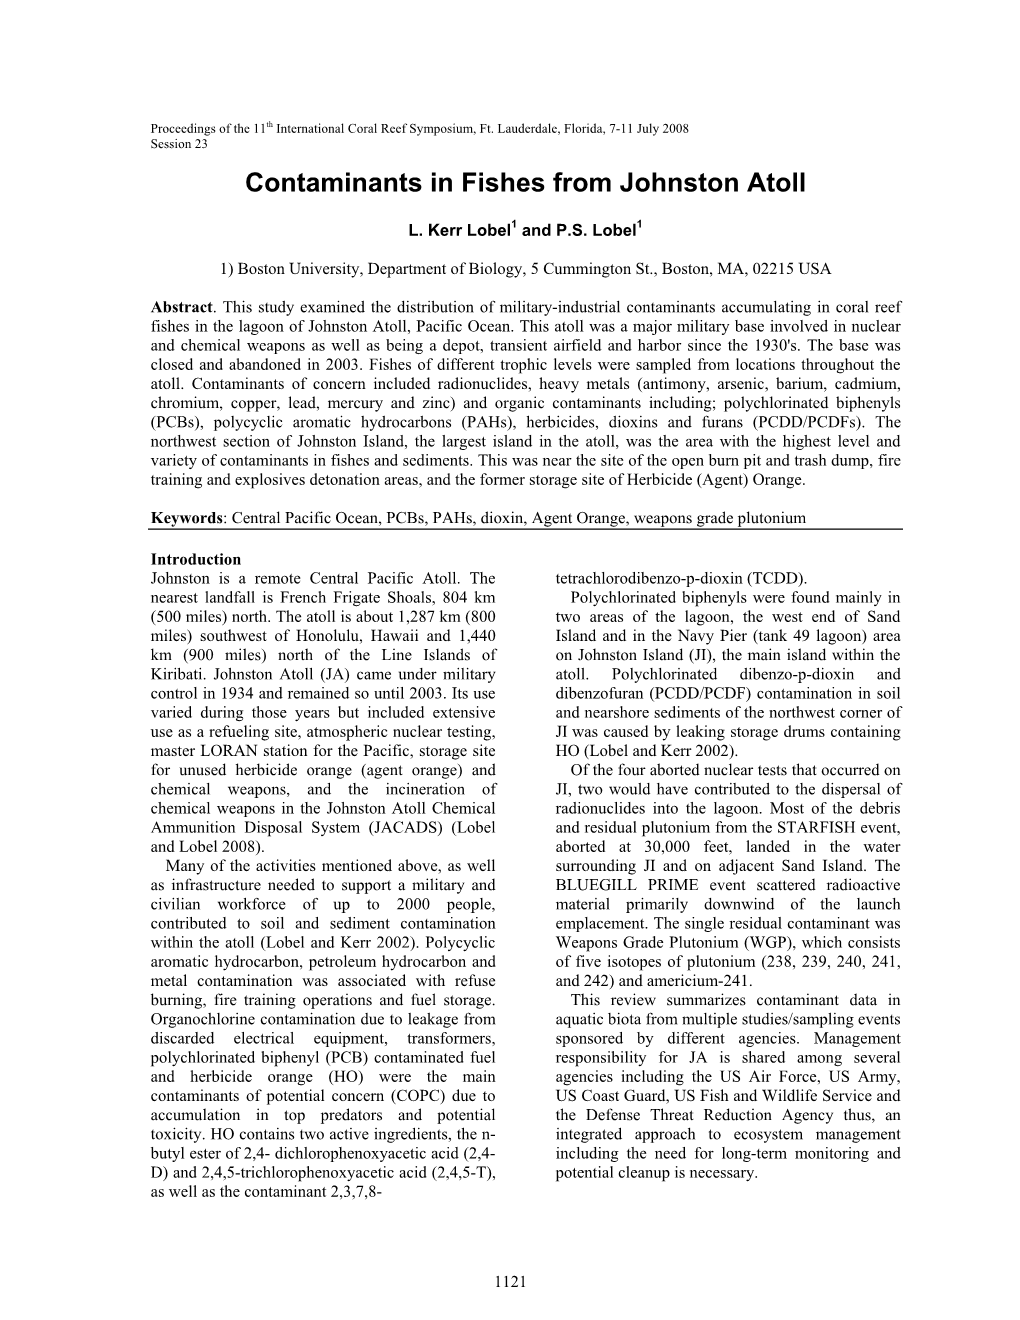 Contaminants in Fishes from Johnston Atoll